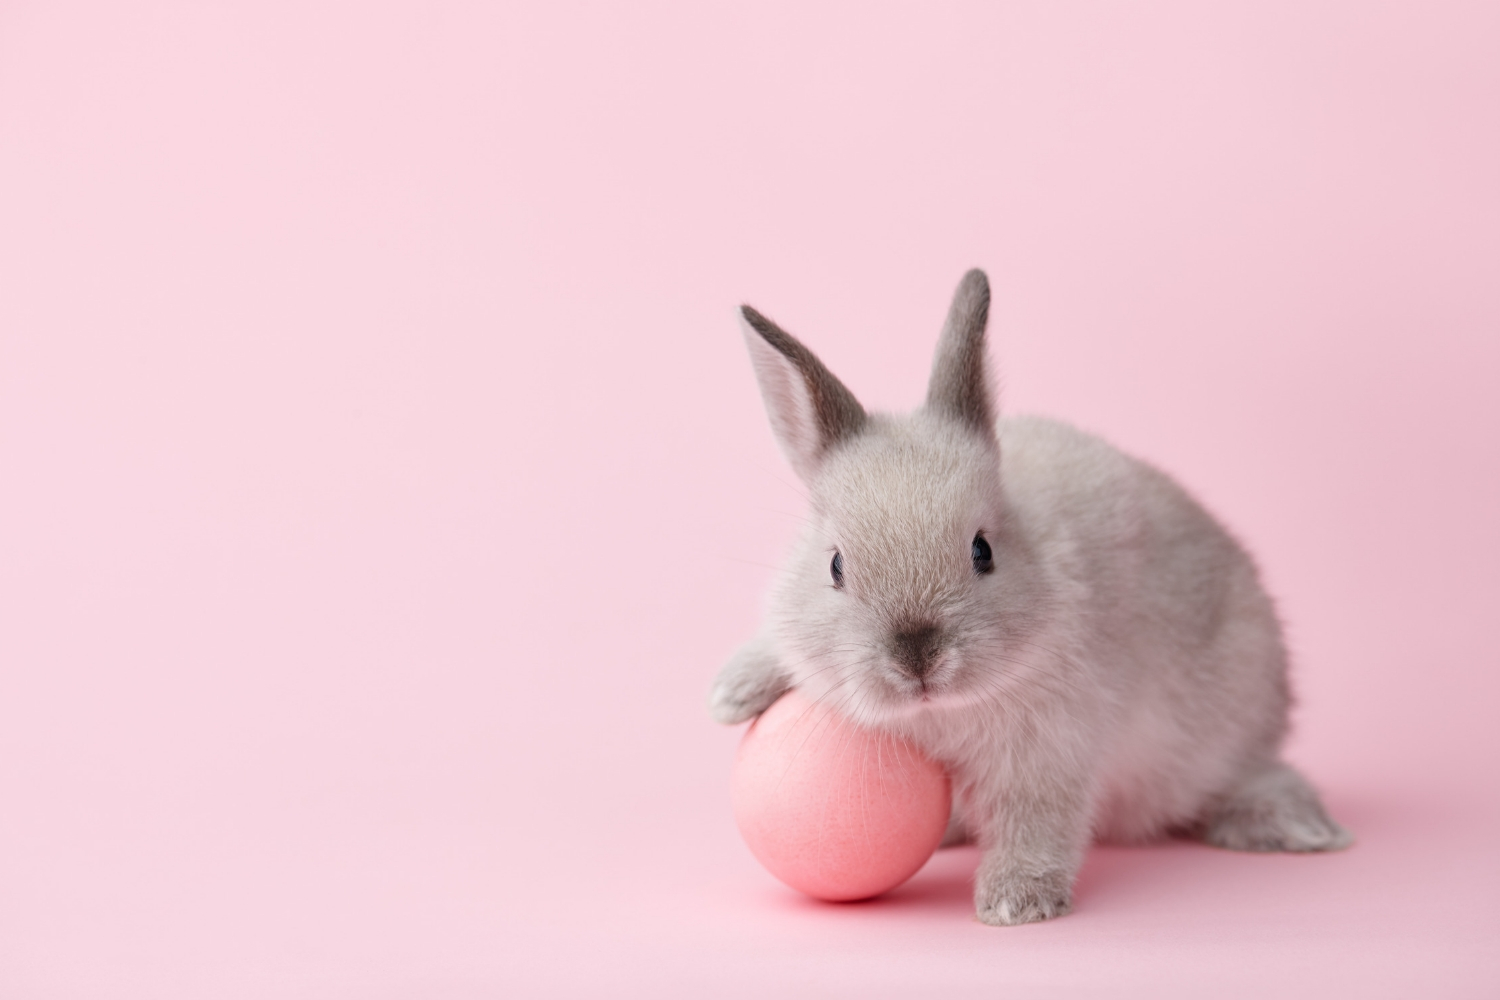 A-Z Of International Cruelty-Free Brands To Add To Your Beauty ...